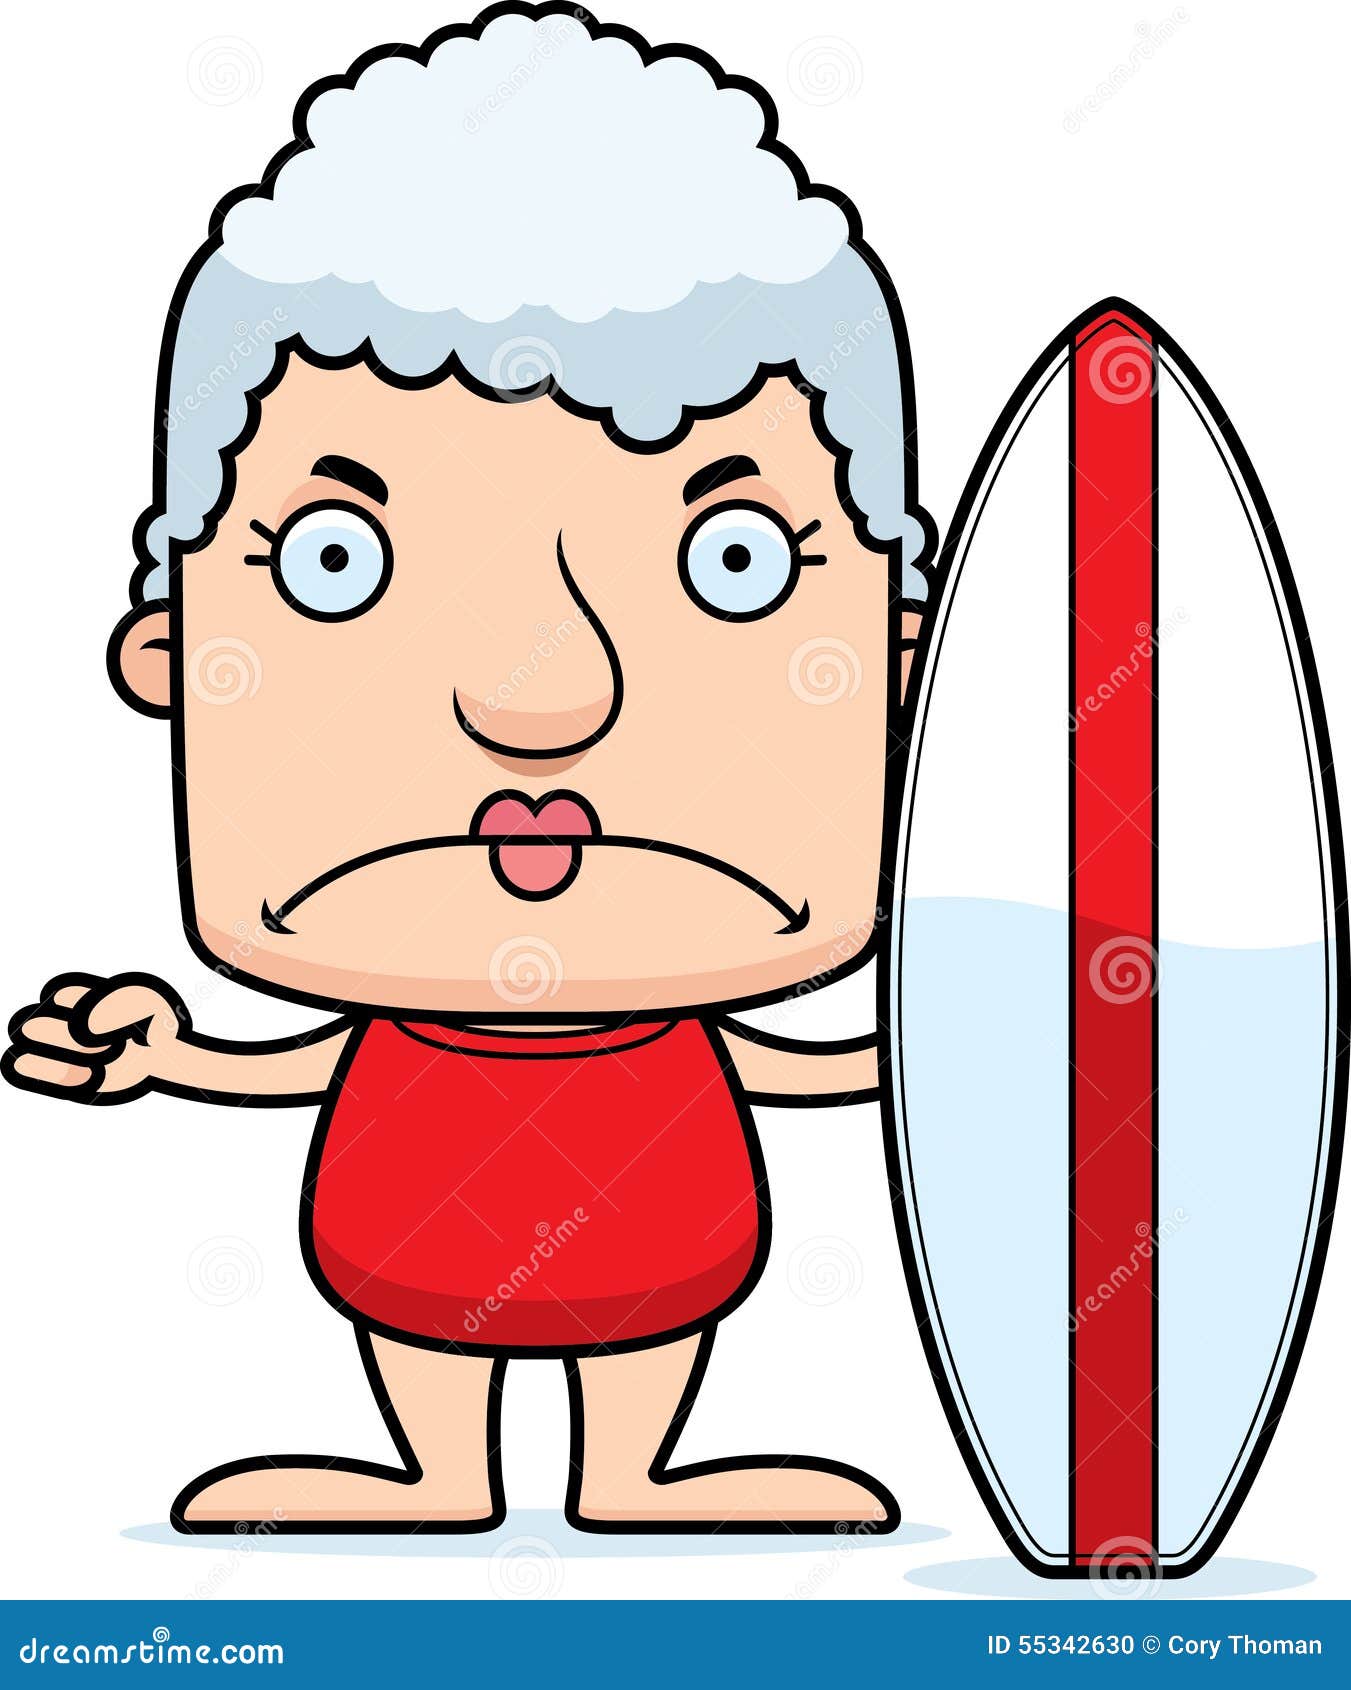 Cartoon Angry Surfer Woman. A cartoon surfer woman looking angry.